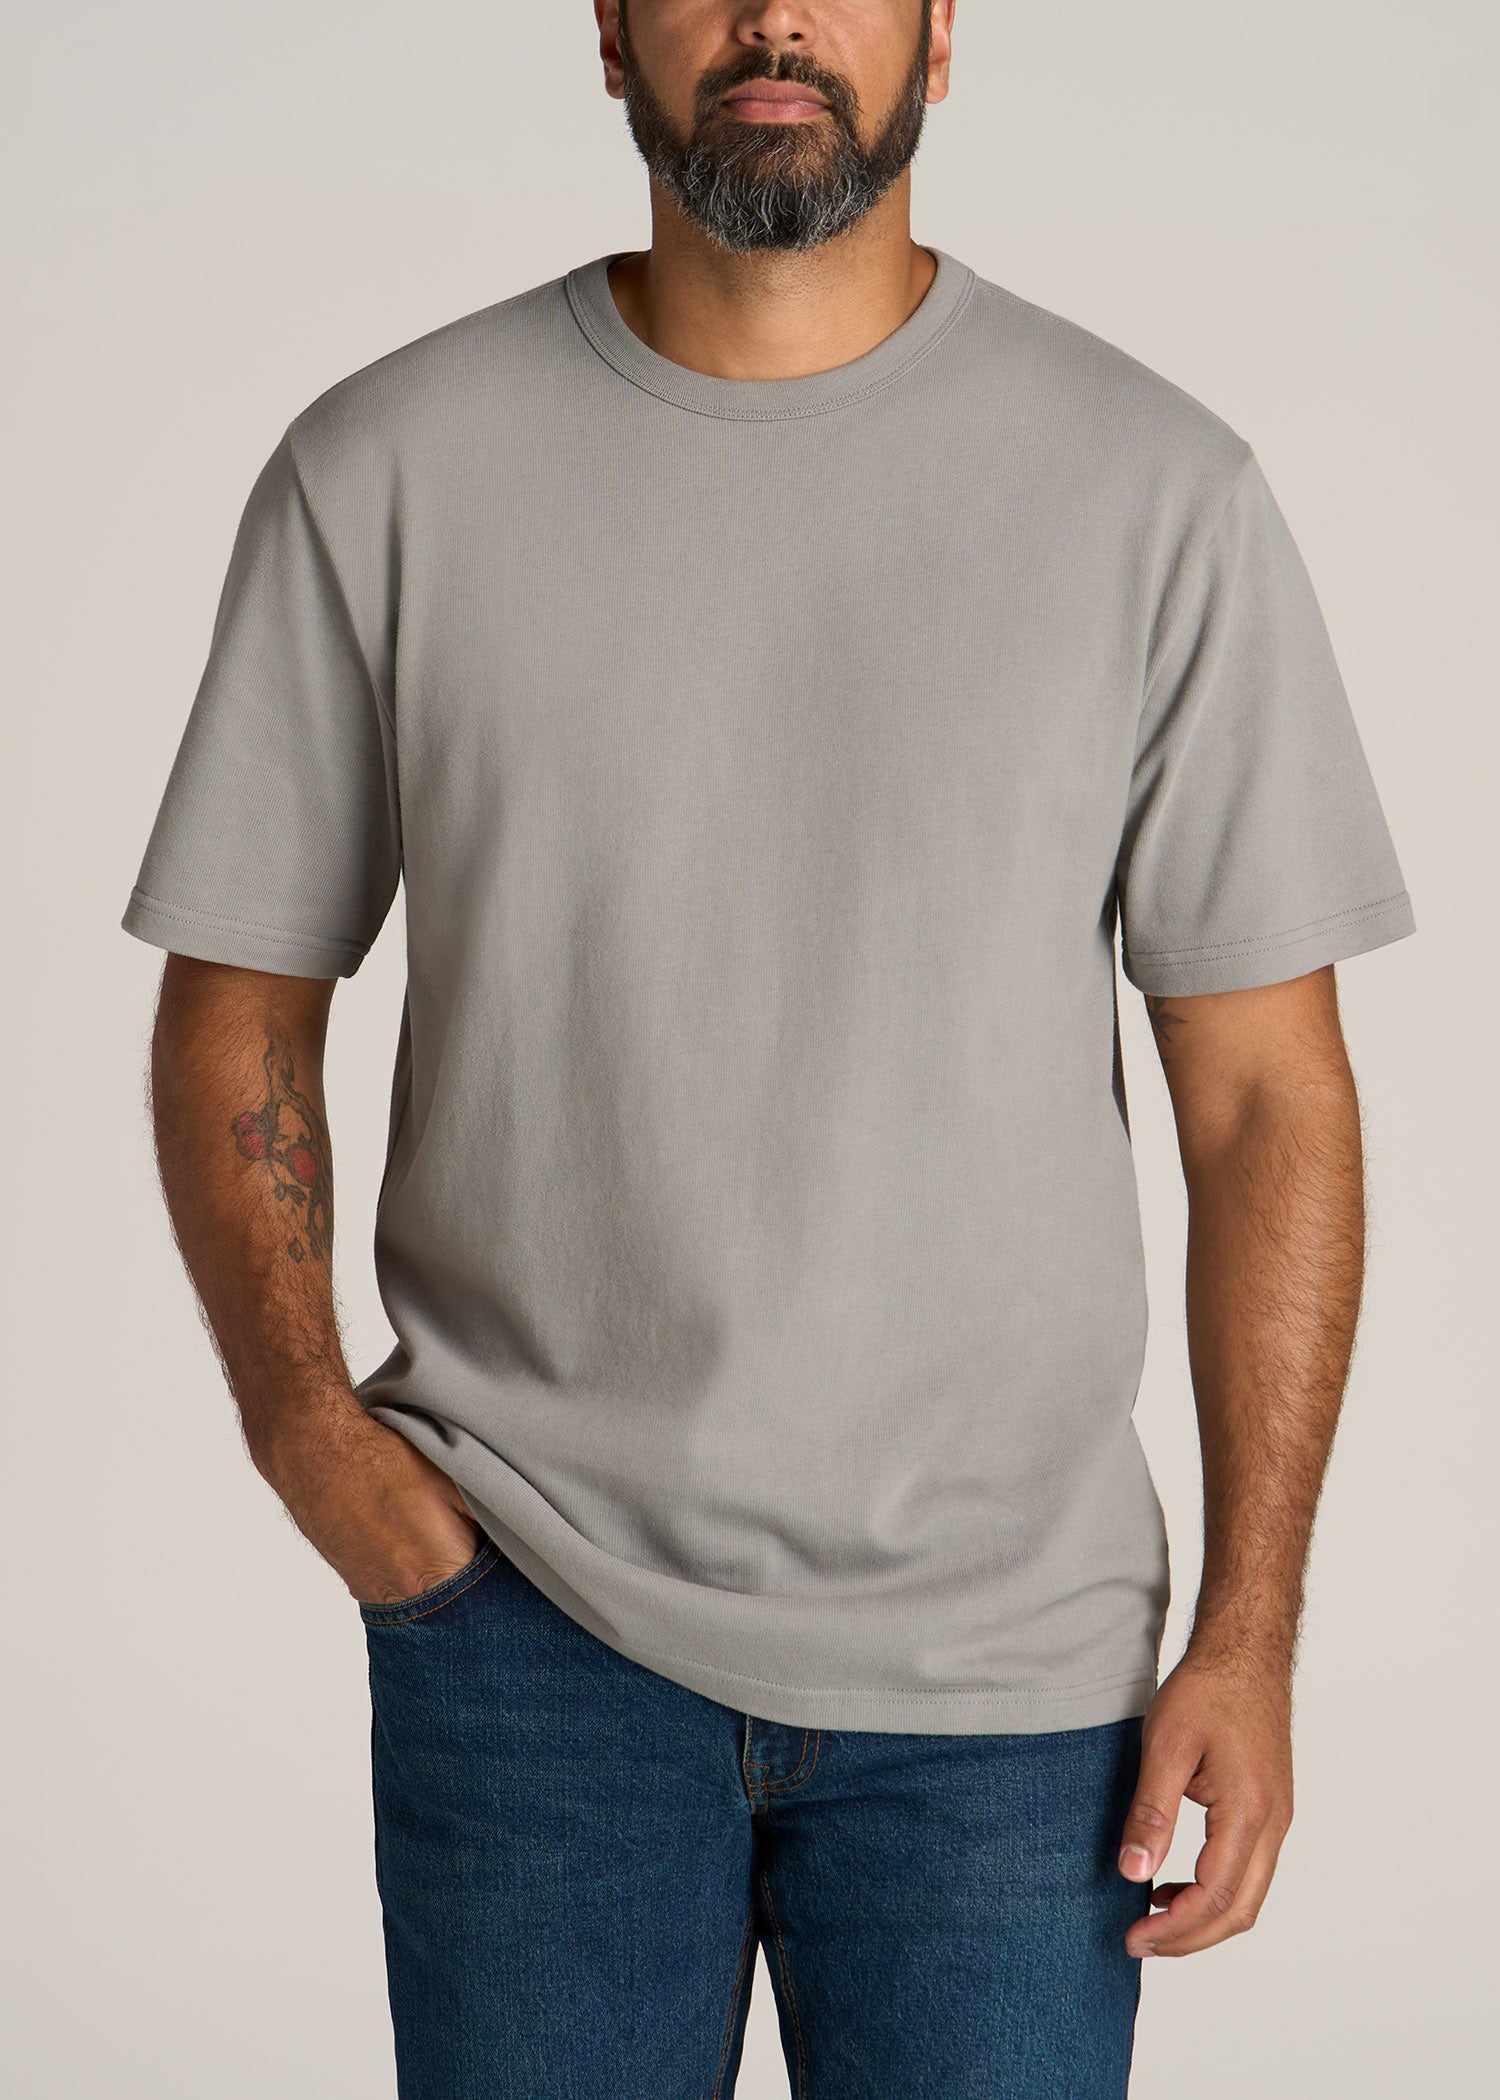 LJ-Pigment-Dyed-Heavyweight-Tee-Pewter-front